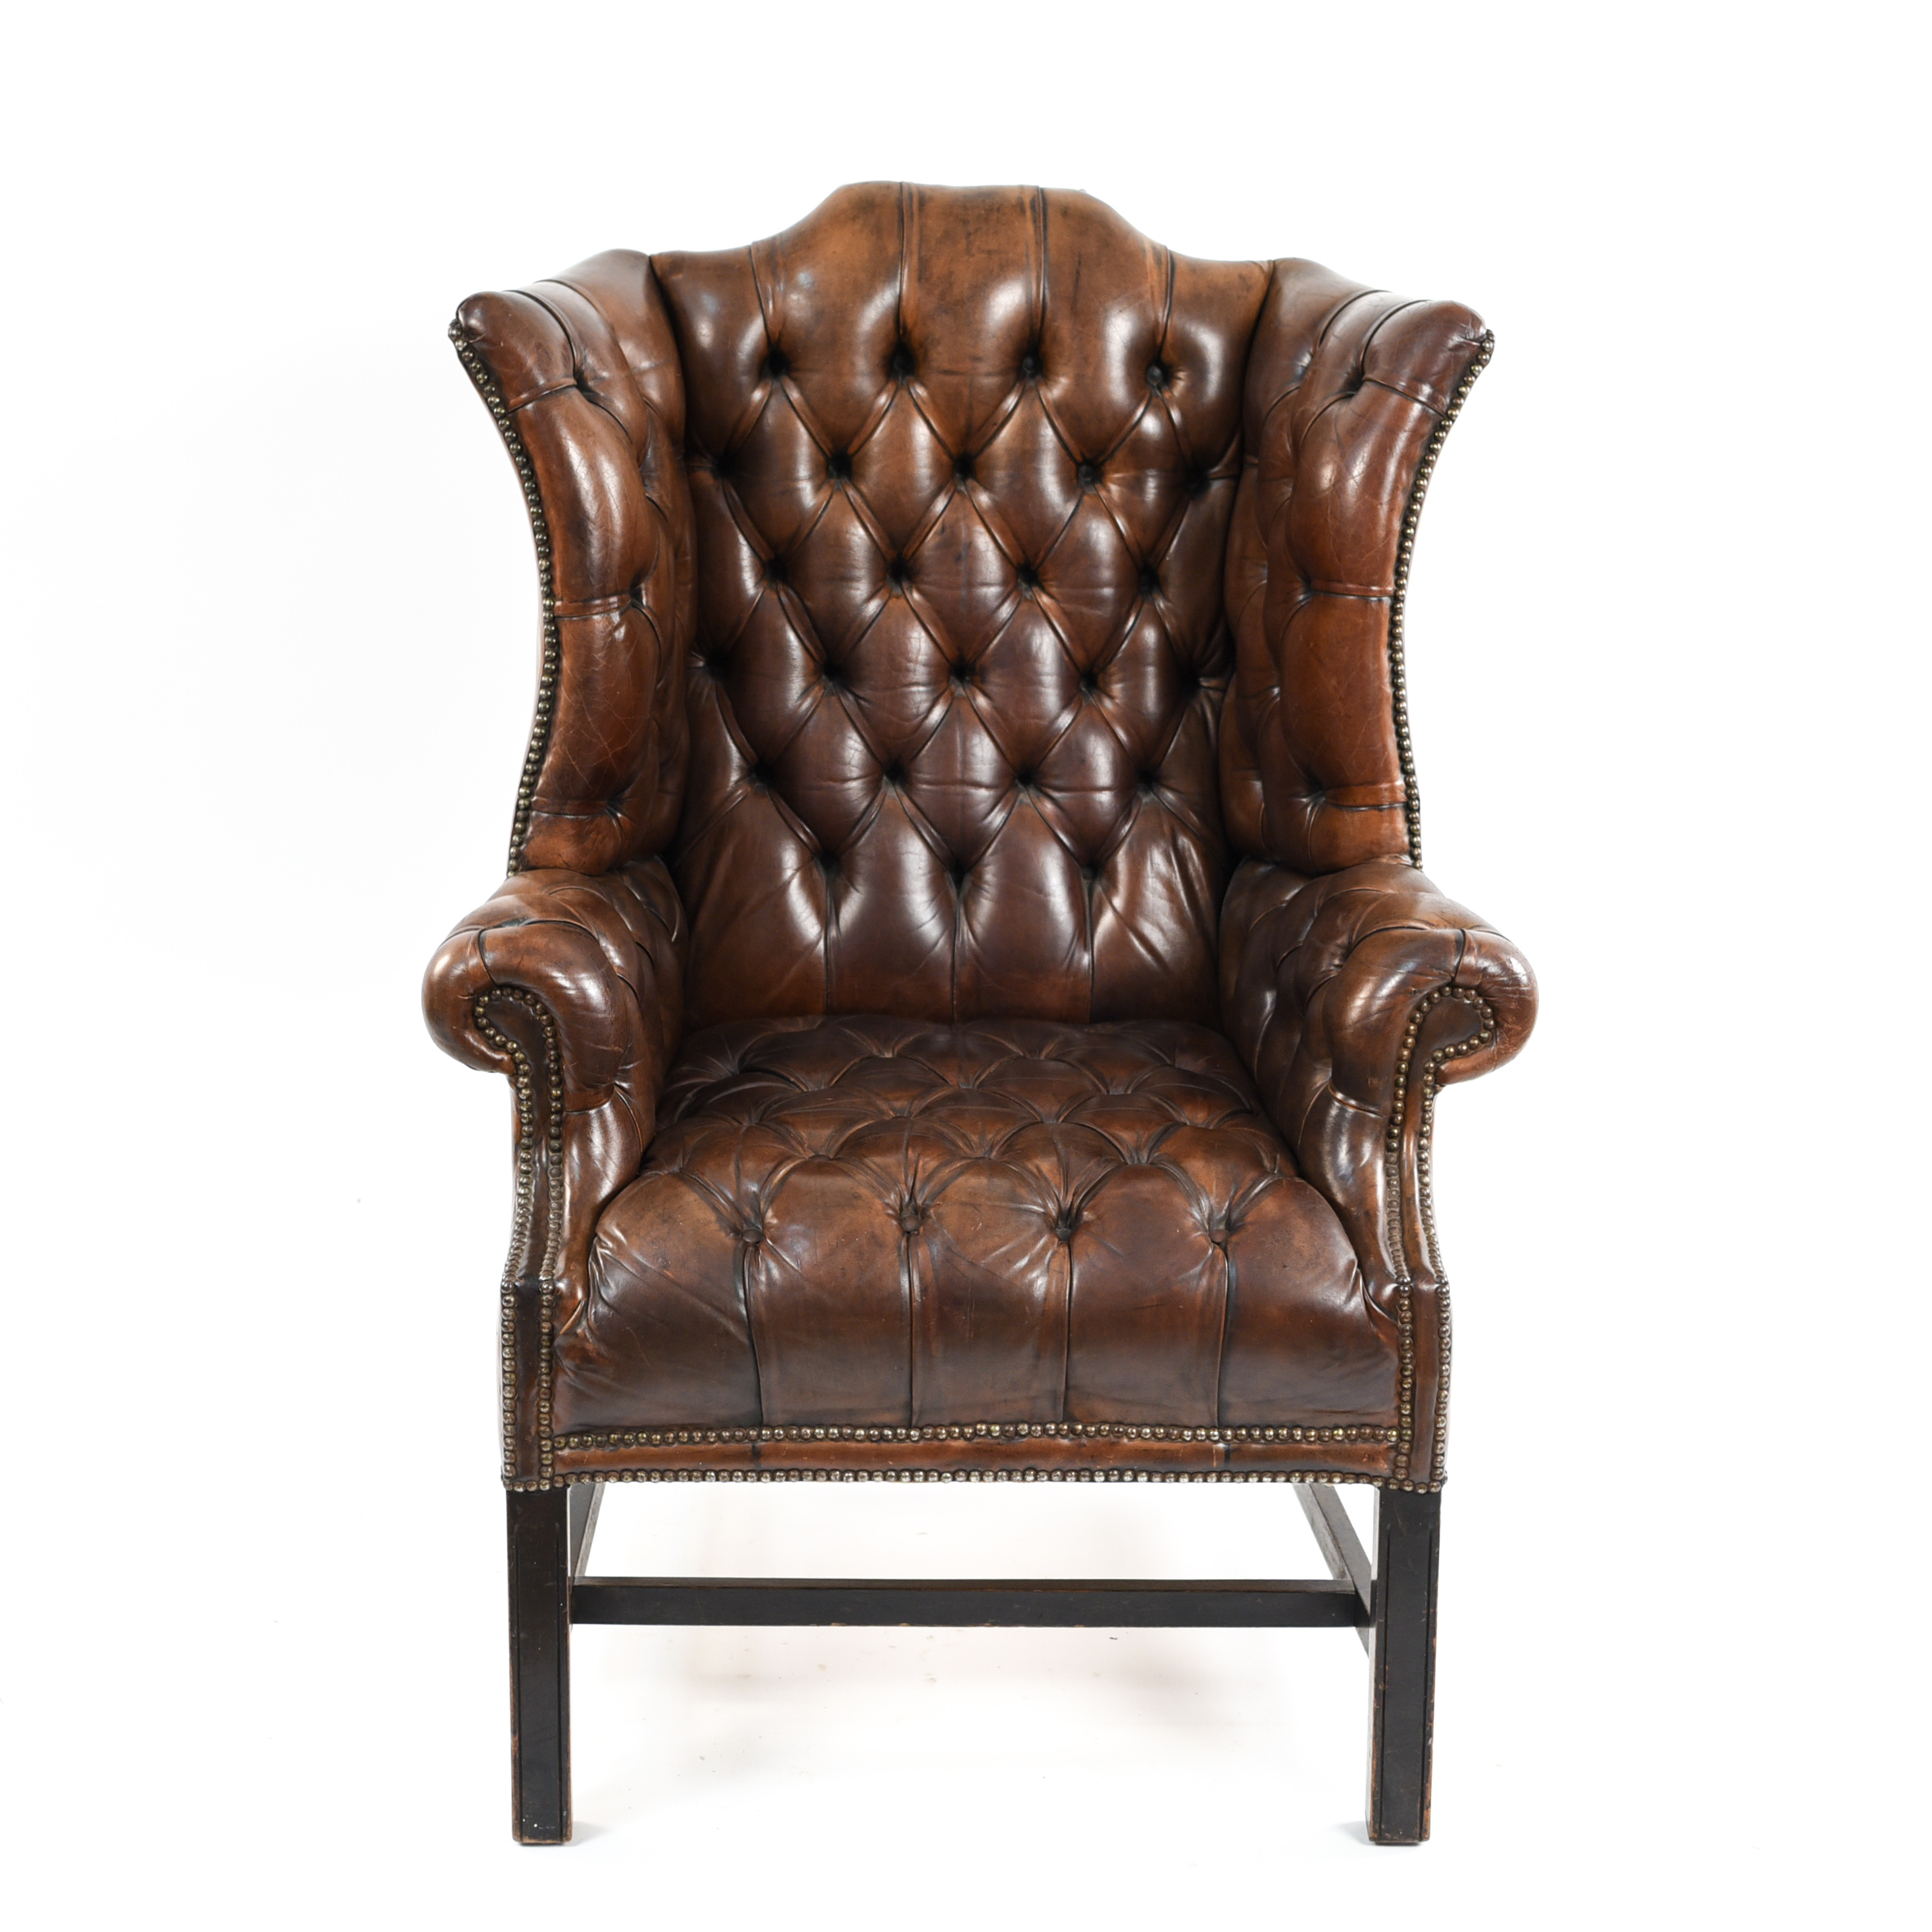 On Tufted Leather Wing Back Chair, What Is Tufted Leather